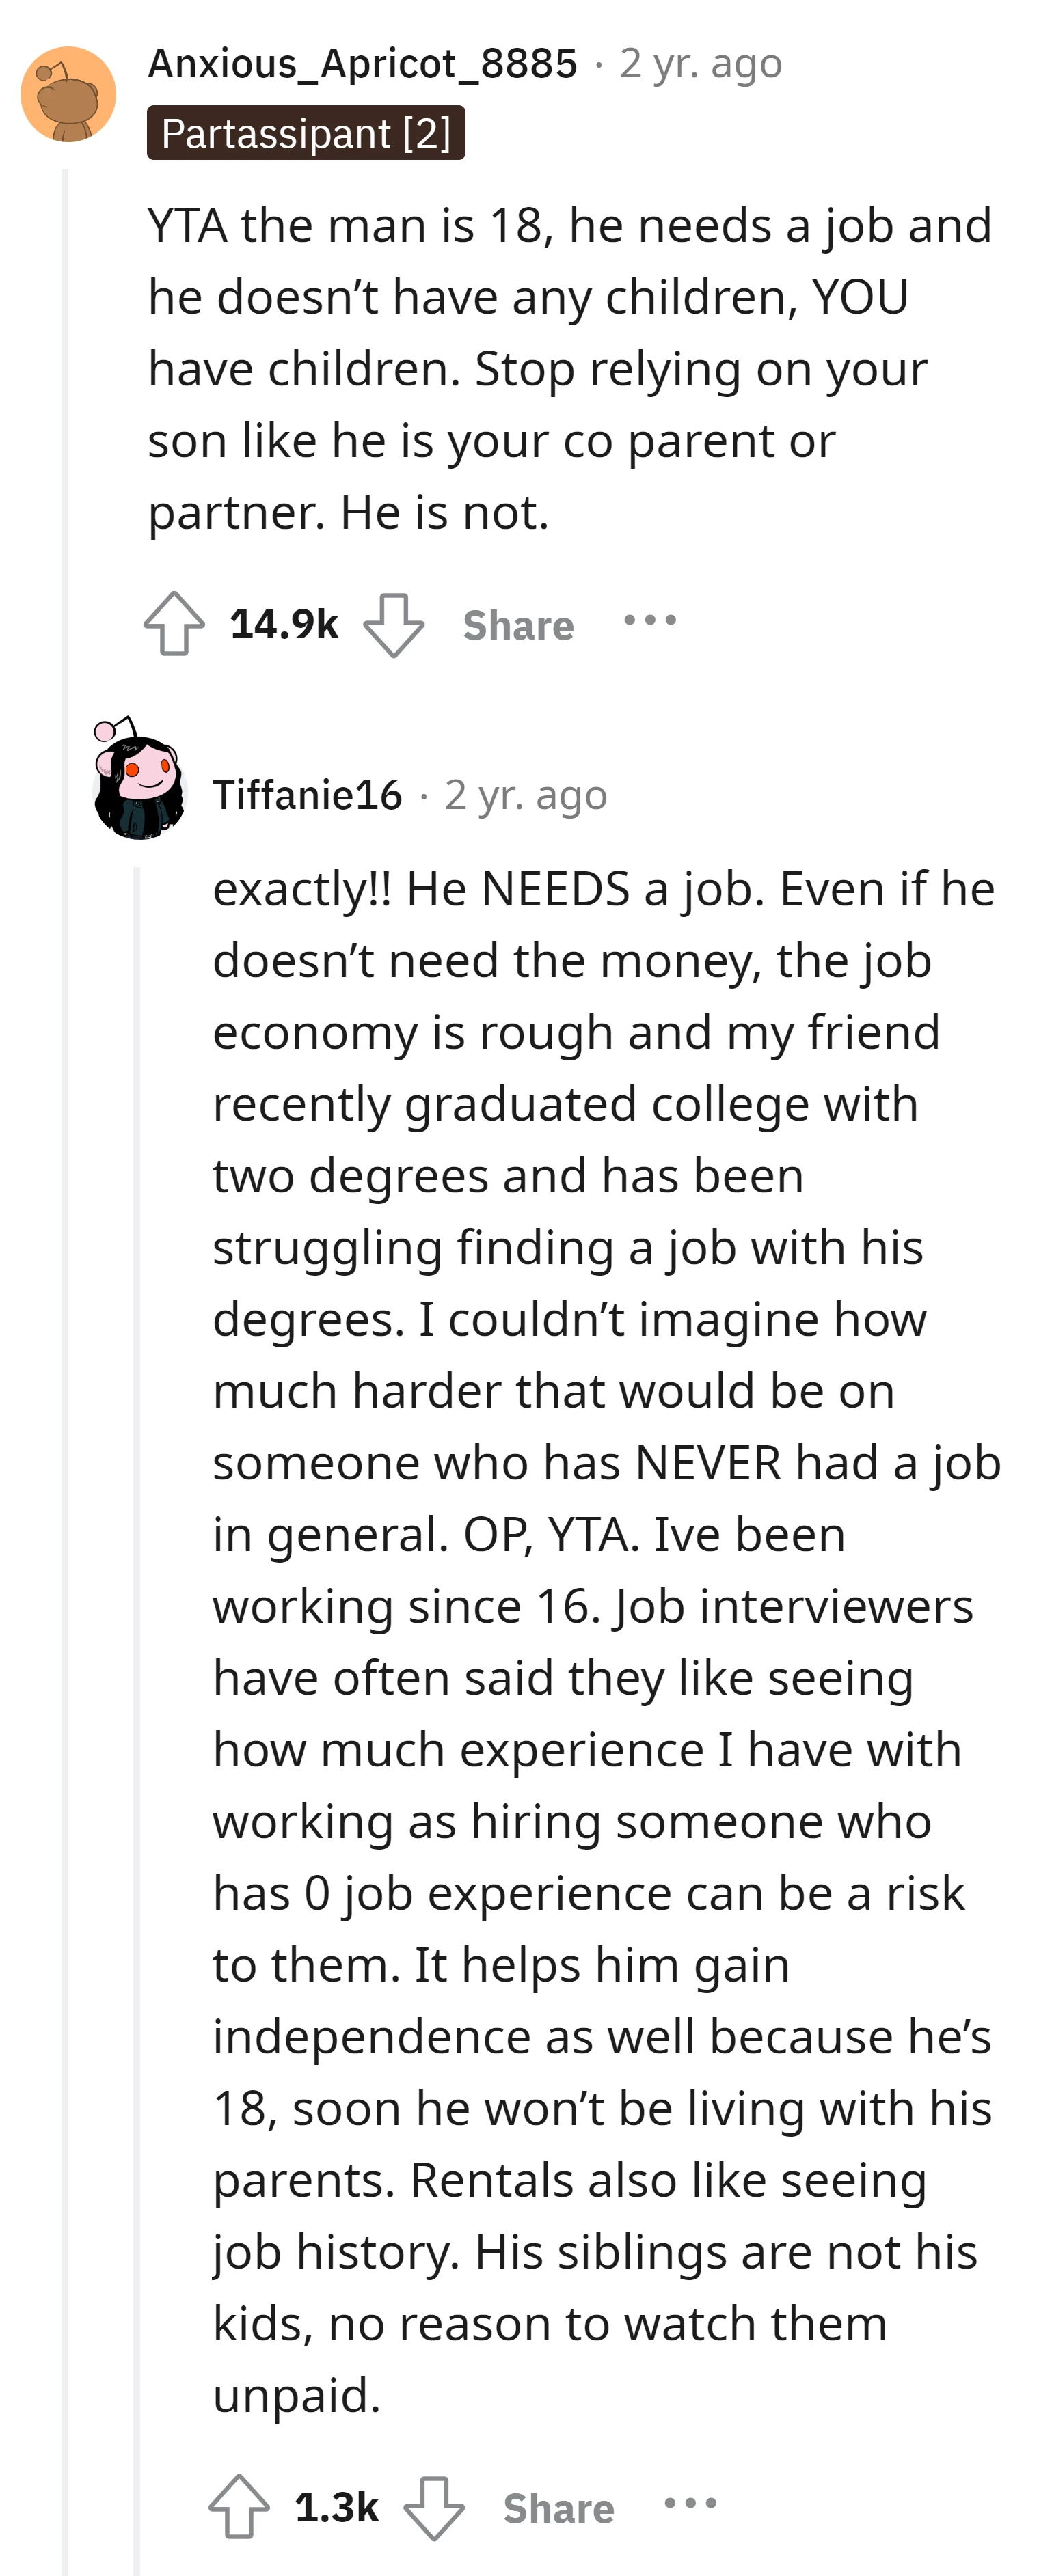 He needs a job for personal growth and independence